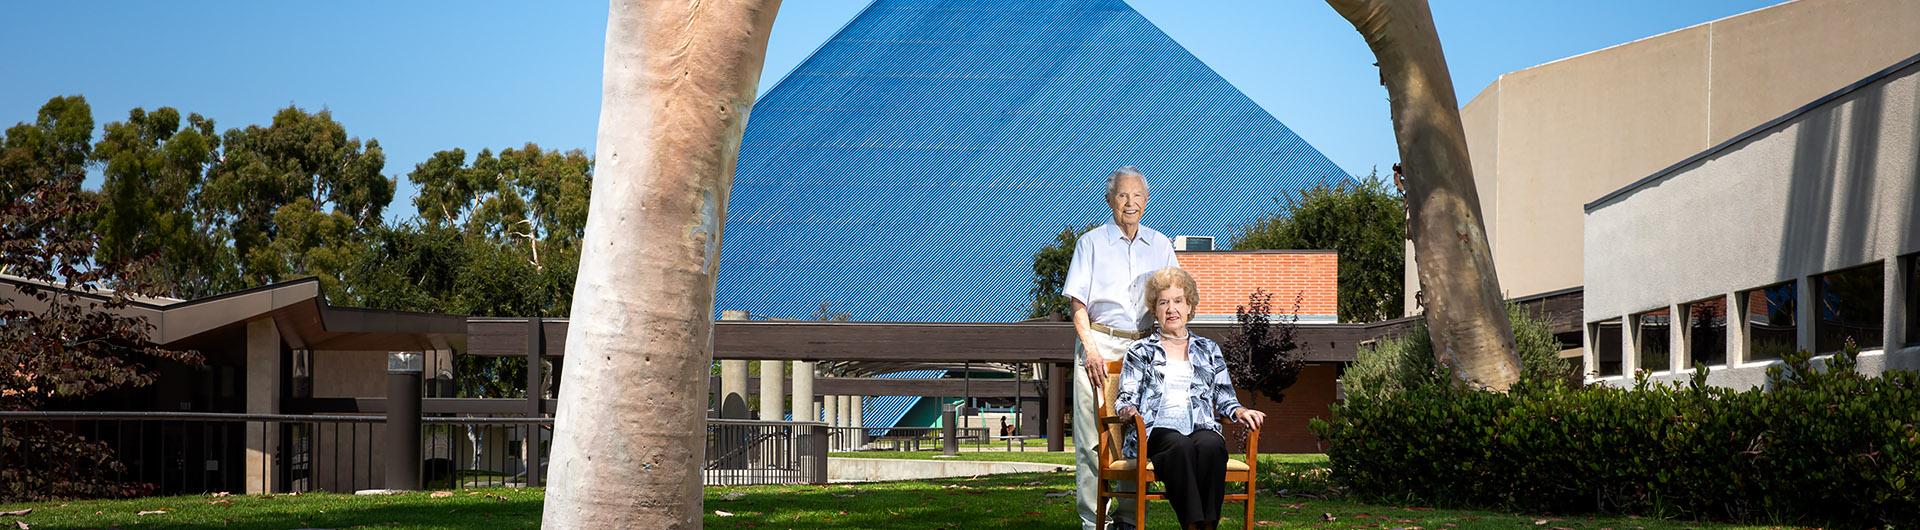 Mike and Arline Walter standing in front of the Walter Pyramid at Cal State Long Beach.